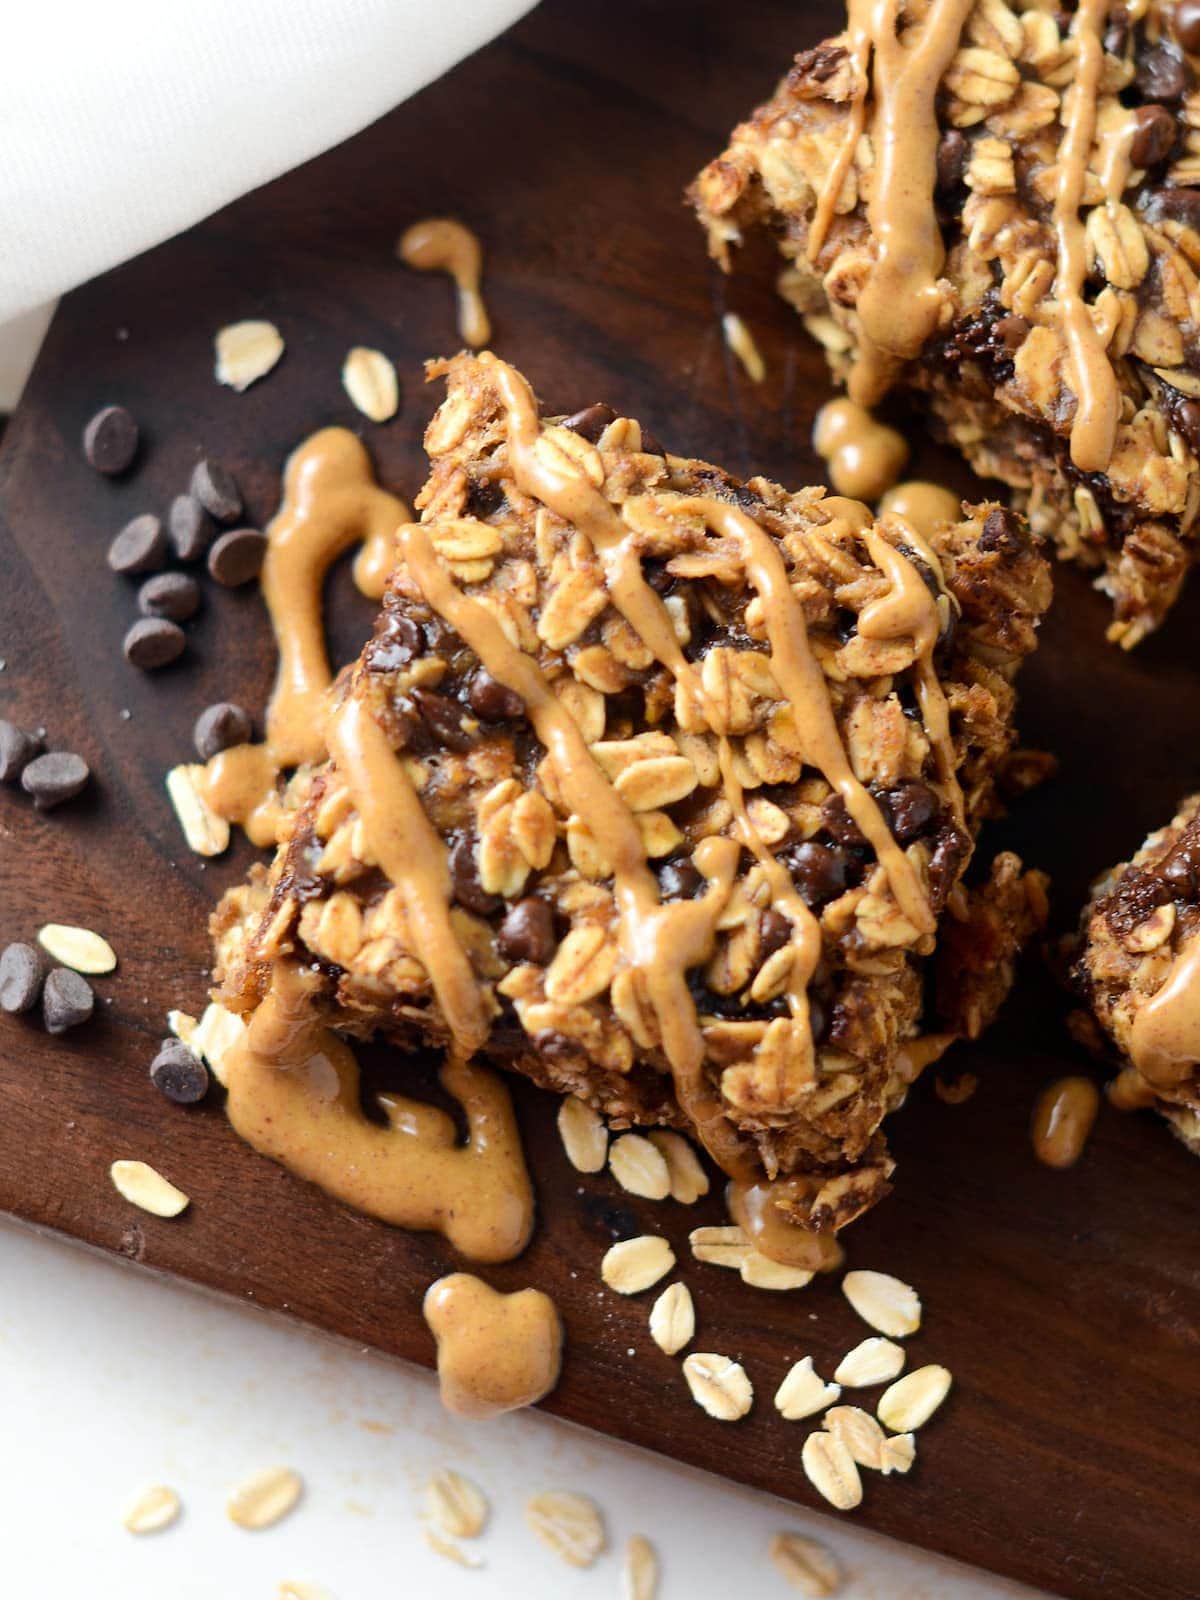 This is a photo of a peanut butter banana oatmeal bar with a peanut butter drizzle.